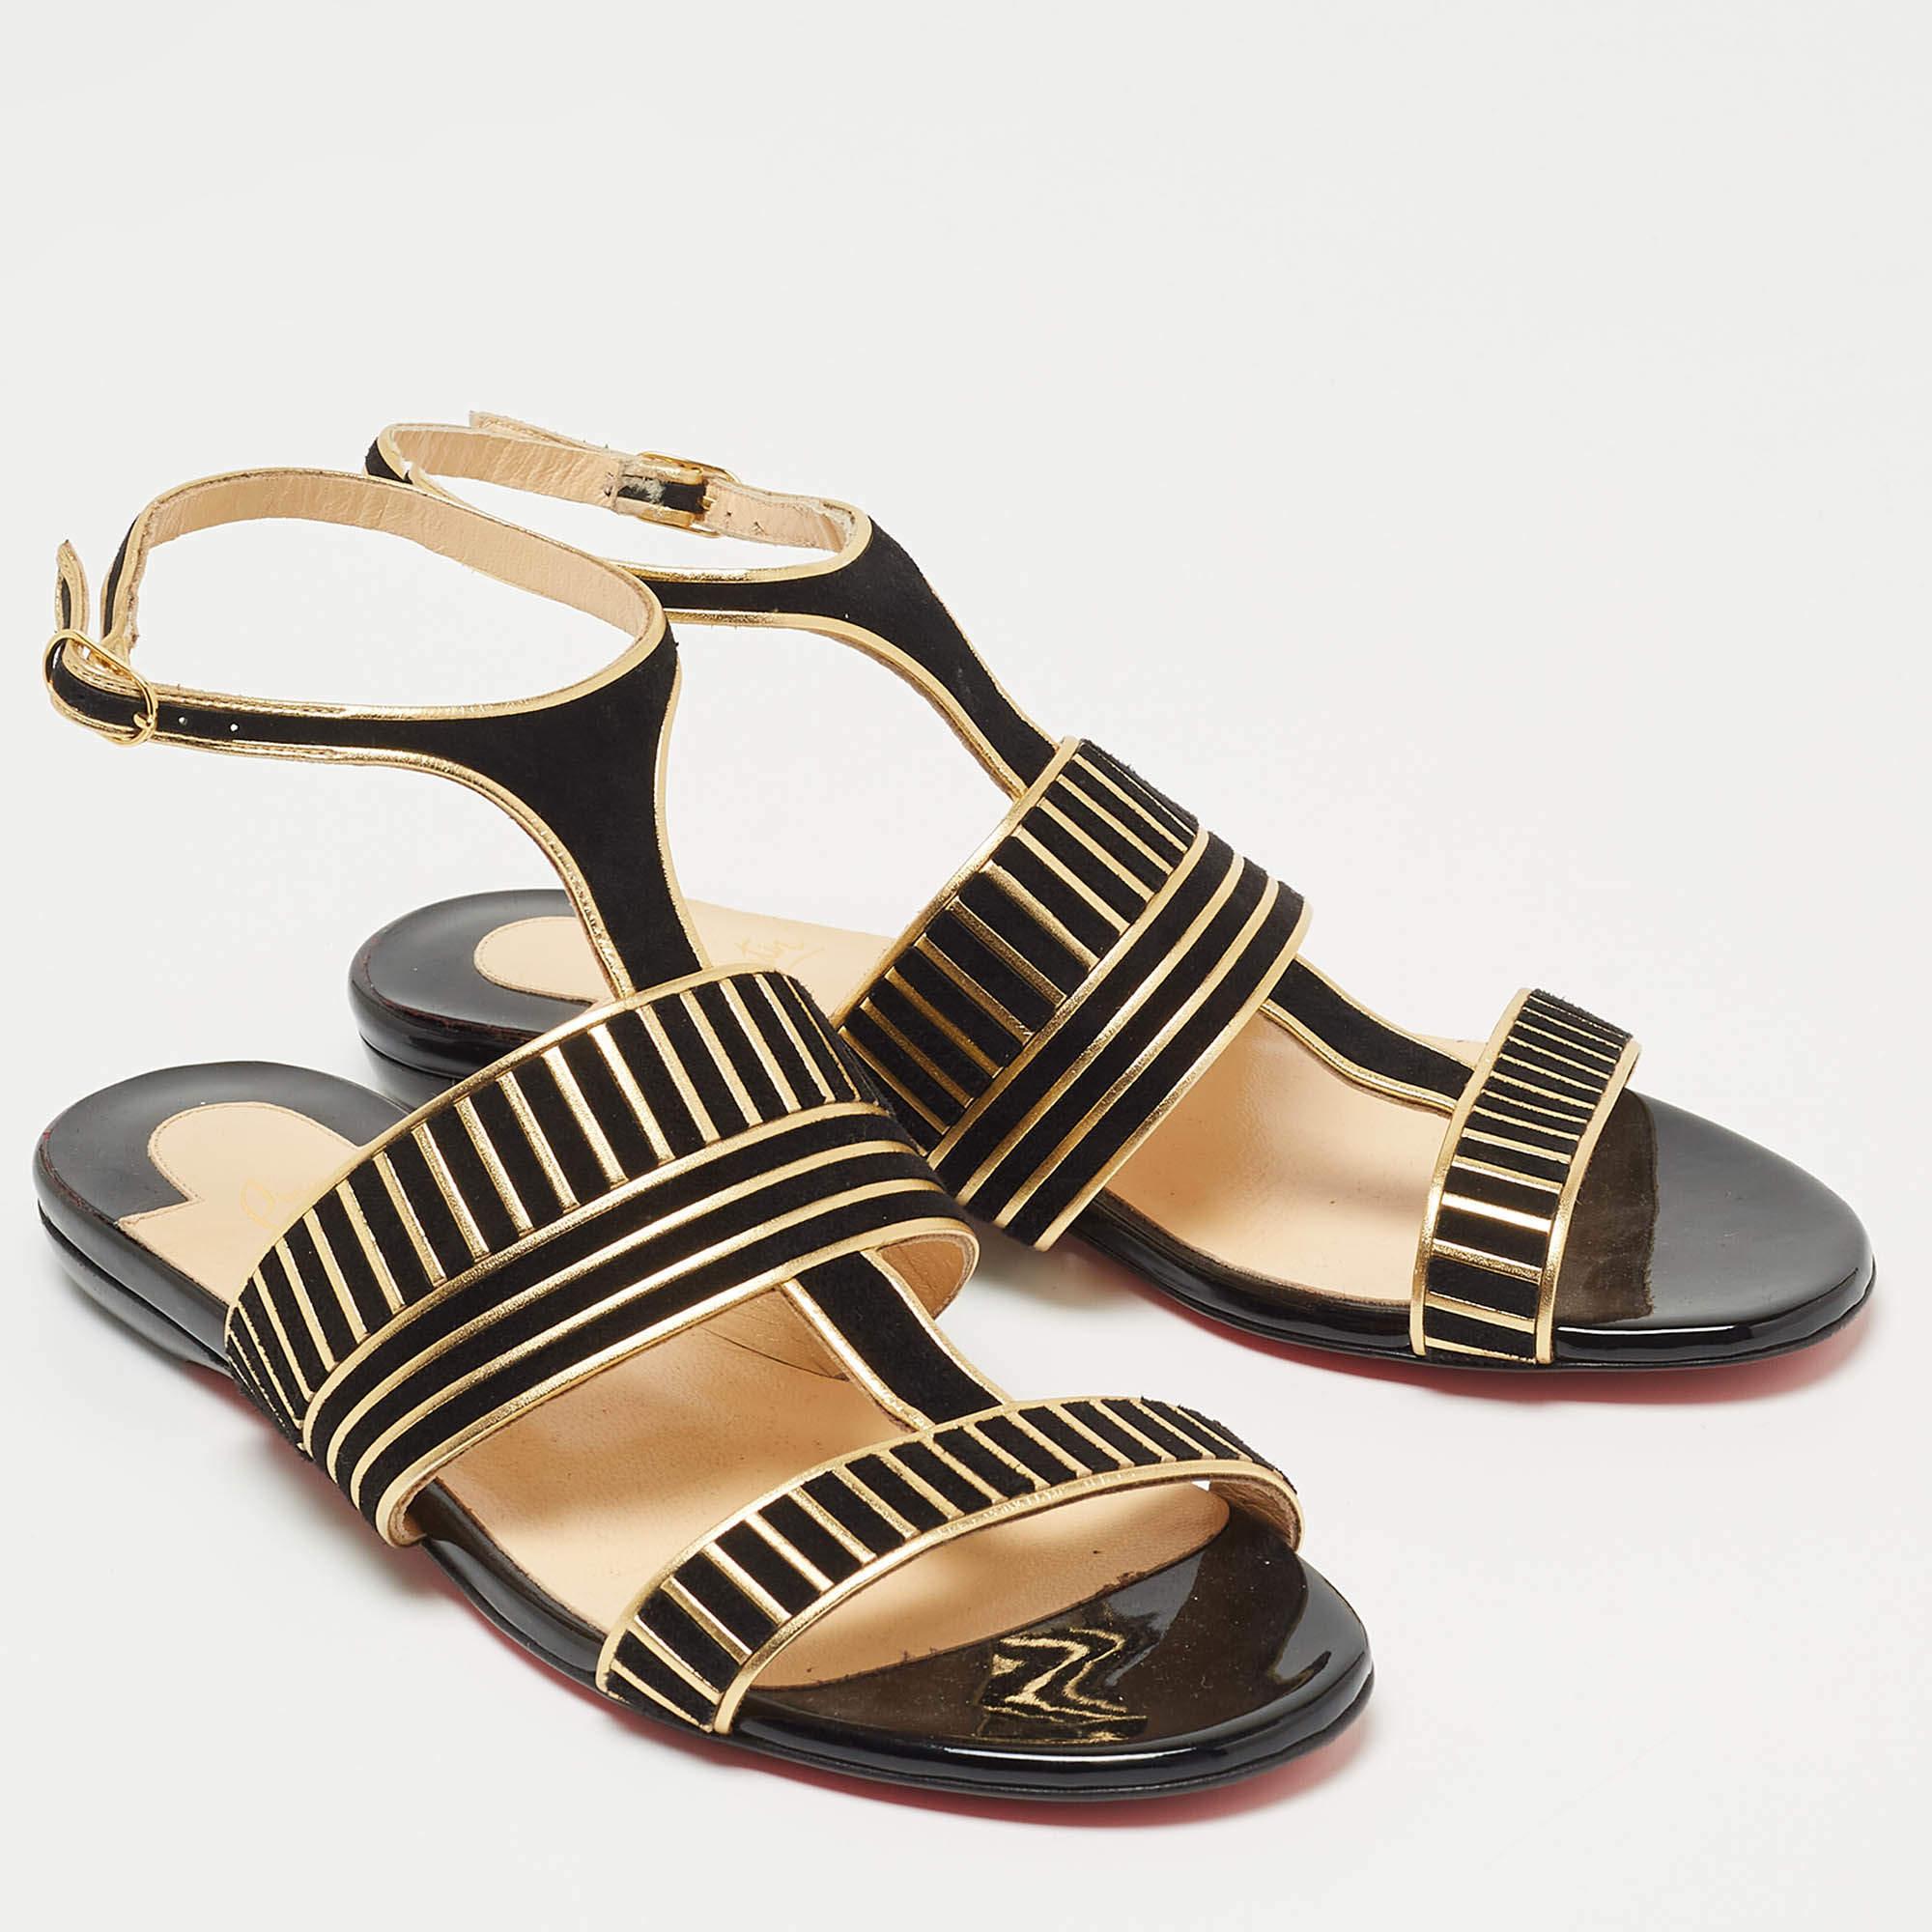 Christian Louboutin Black Suede and Leather Striped Flat Sandals Size 36 In New Condition For Sale In Dubai, Al Qouz 2